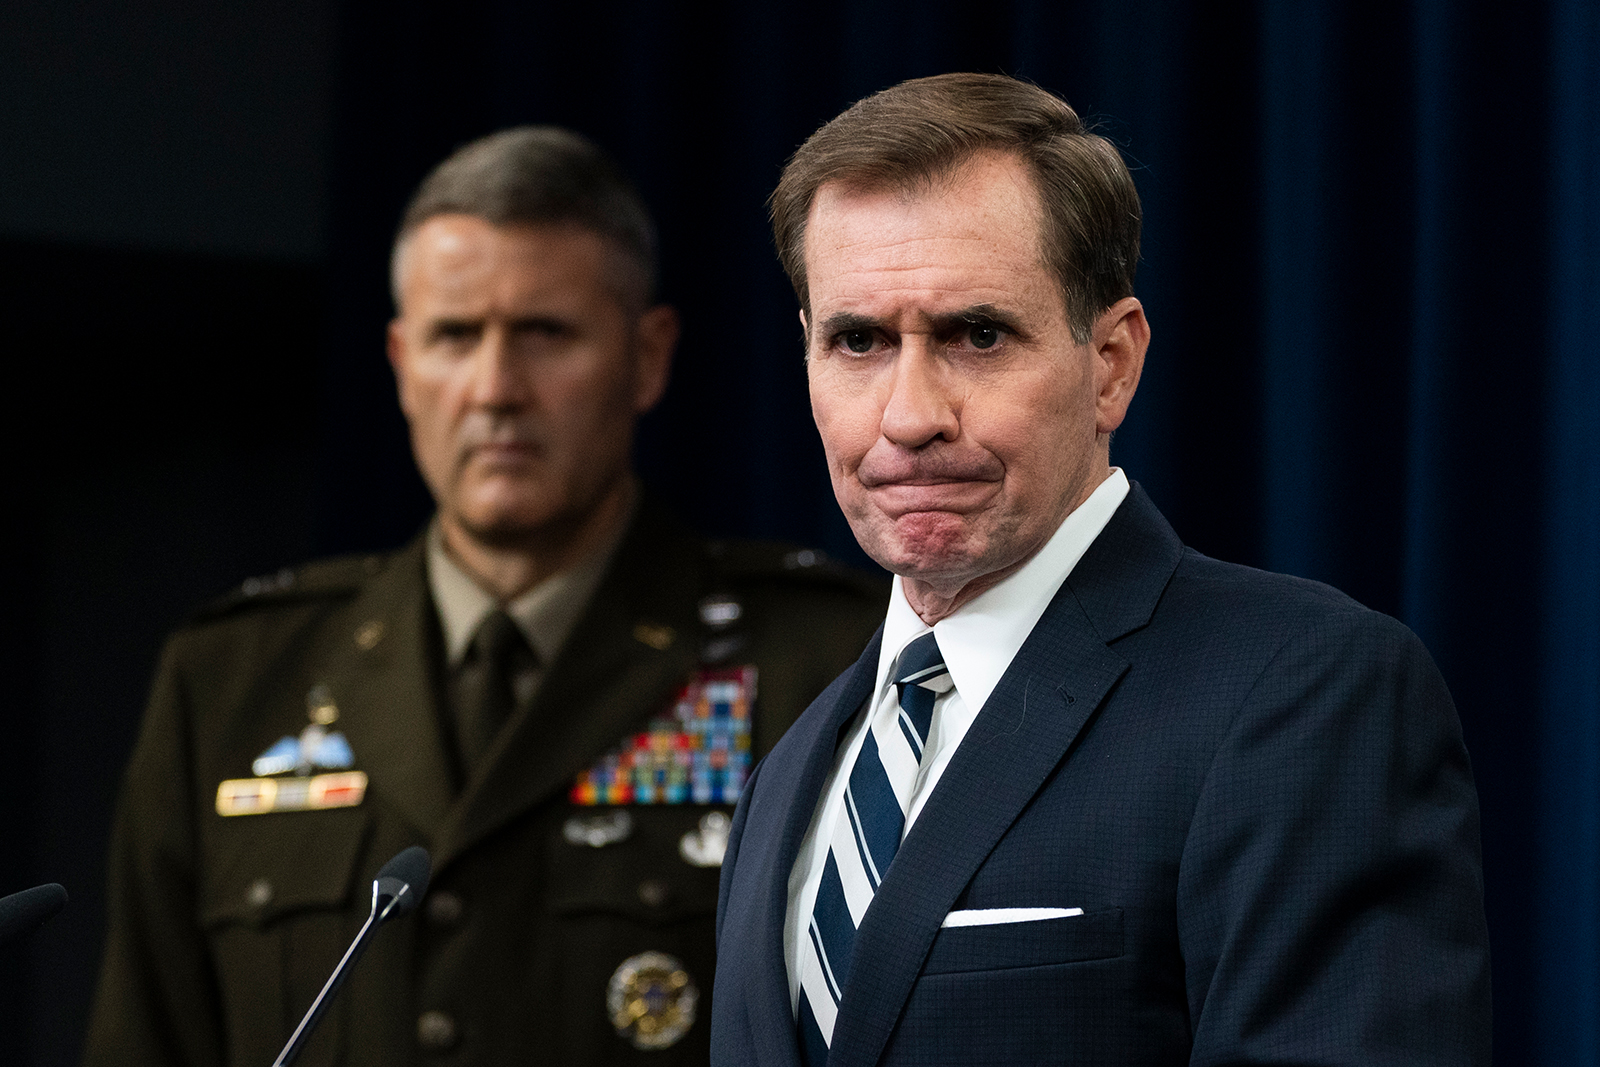 Pentagon spokesman John Kirby with U.S. Army Maj. Gen. William Taylor, Joint Staff Operations, speaks about the situation in Afghanistan during a briefing at the Pentagon in Washington on Monday, August 23.